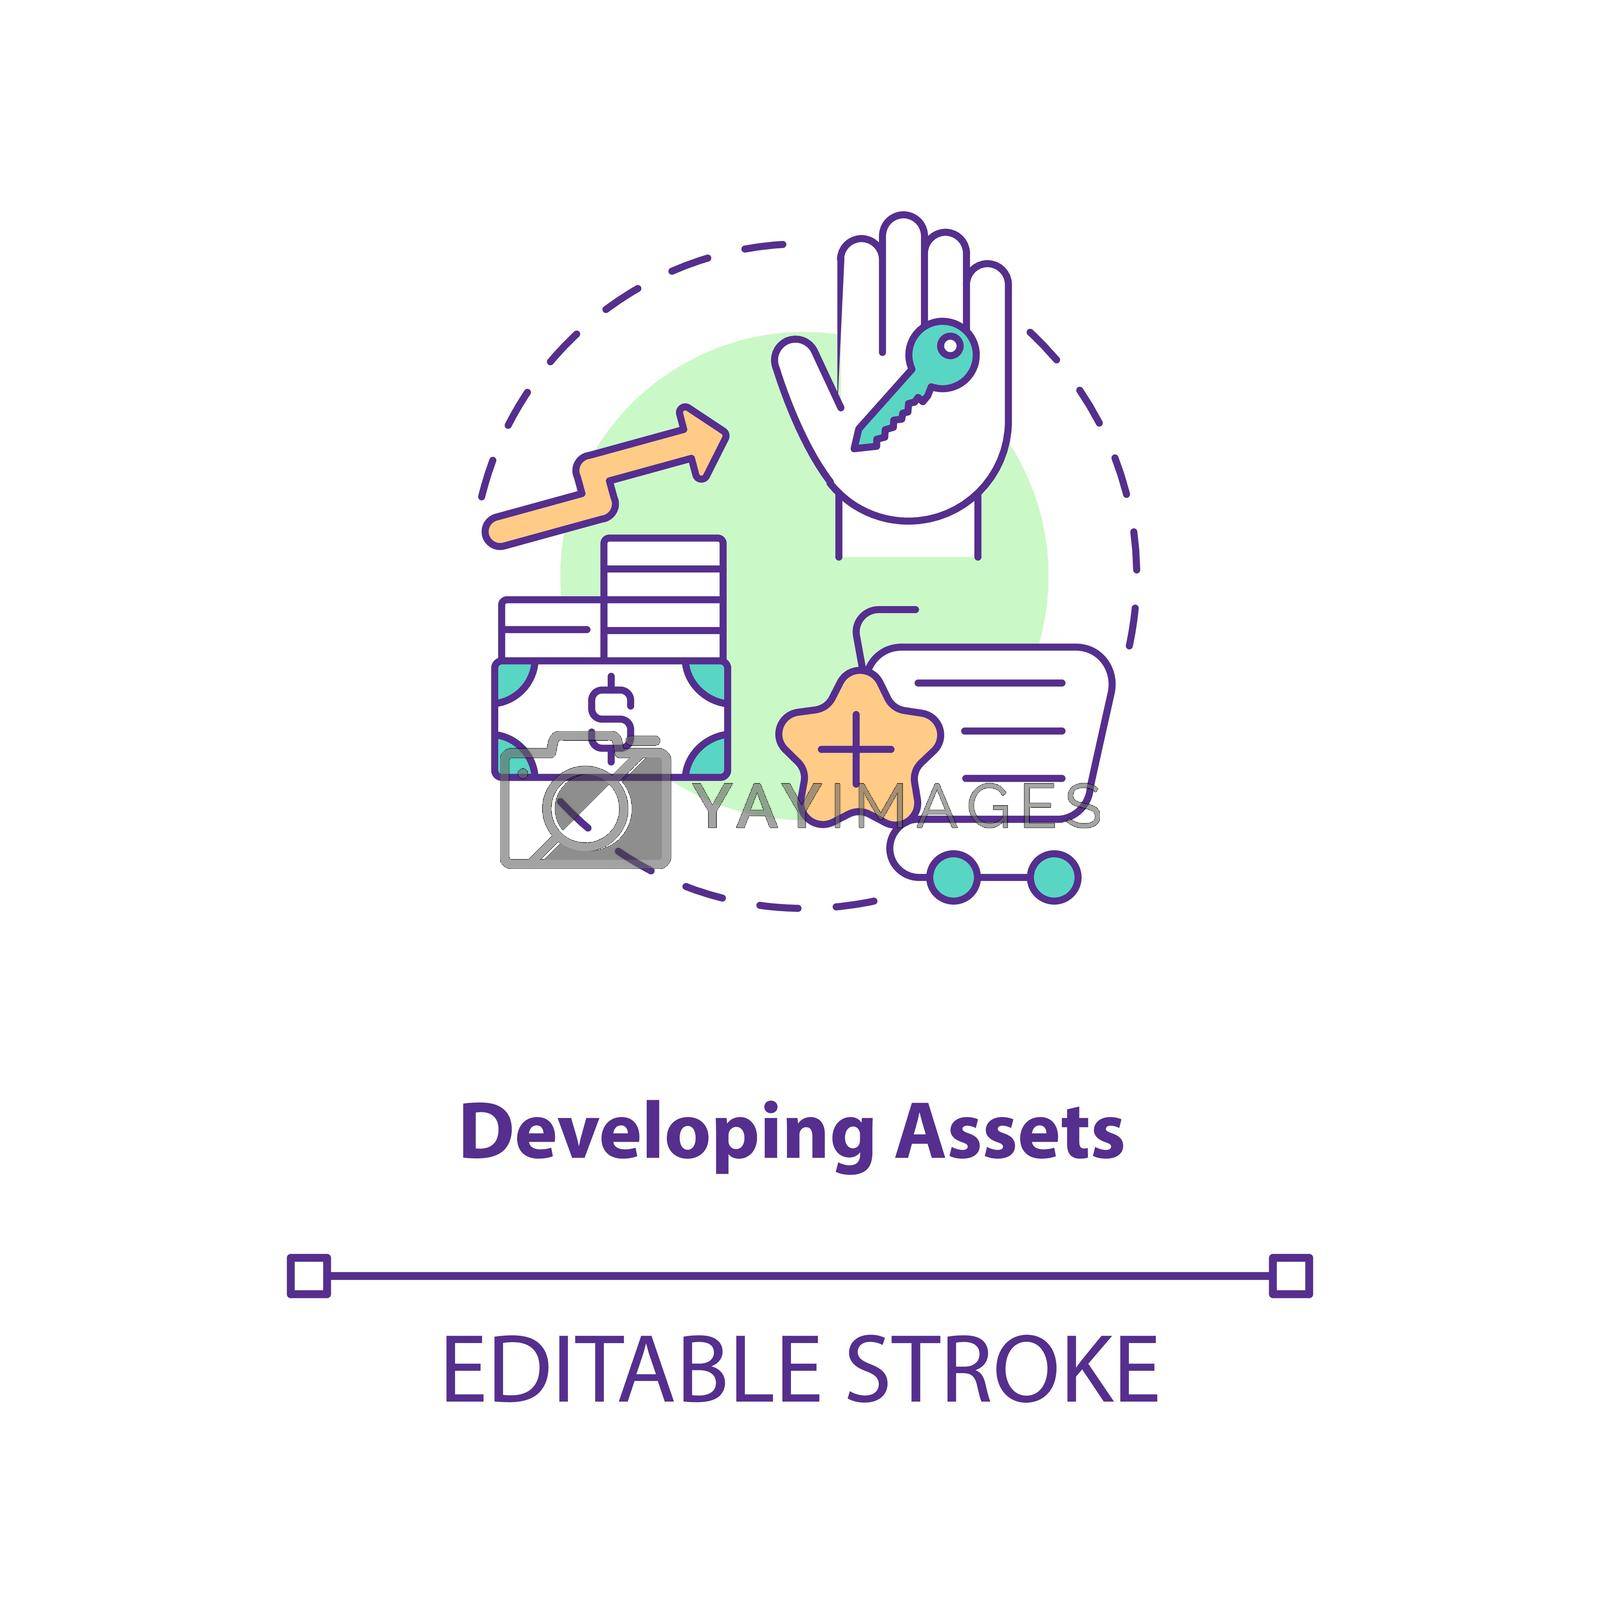 Royalty free image of Developing assets concept icon by bsd